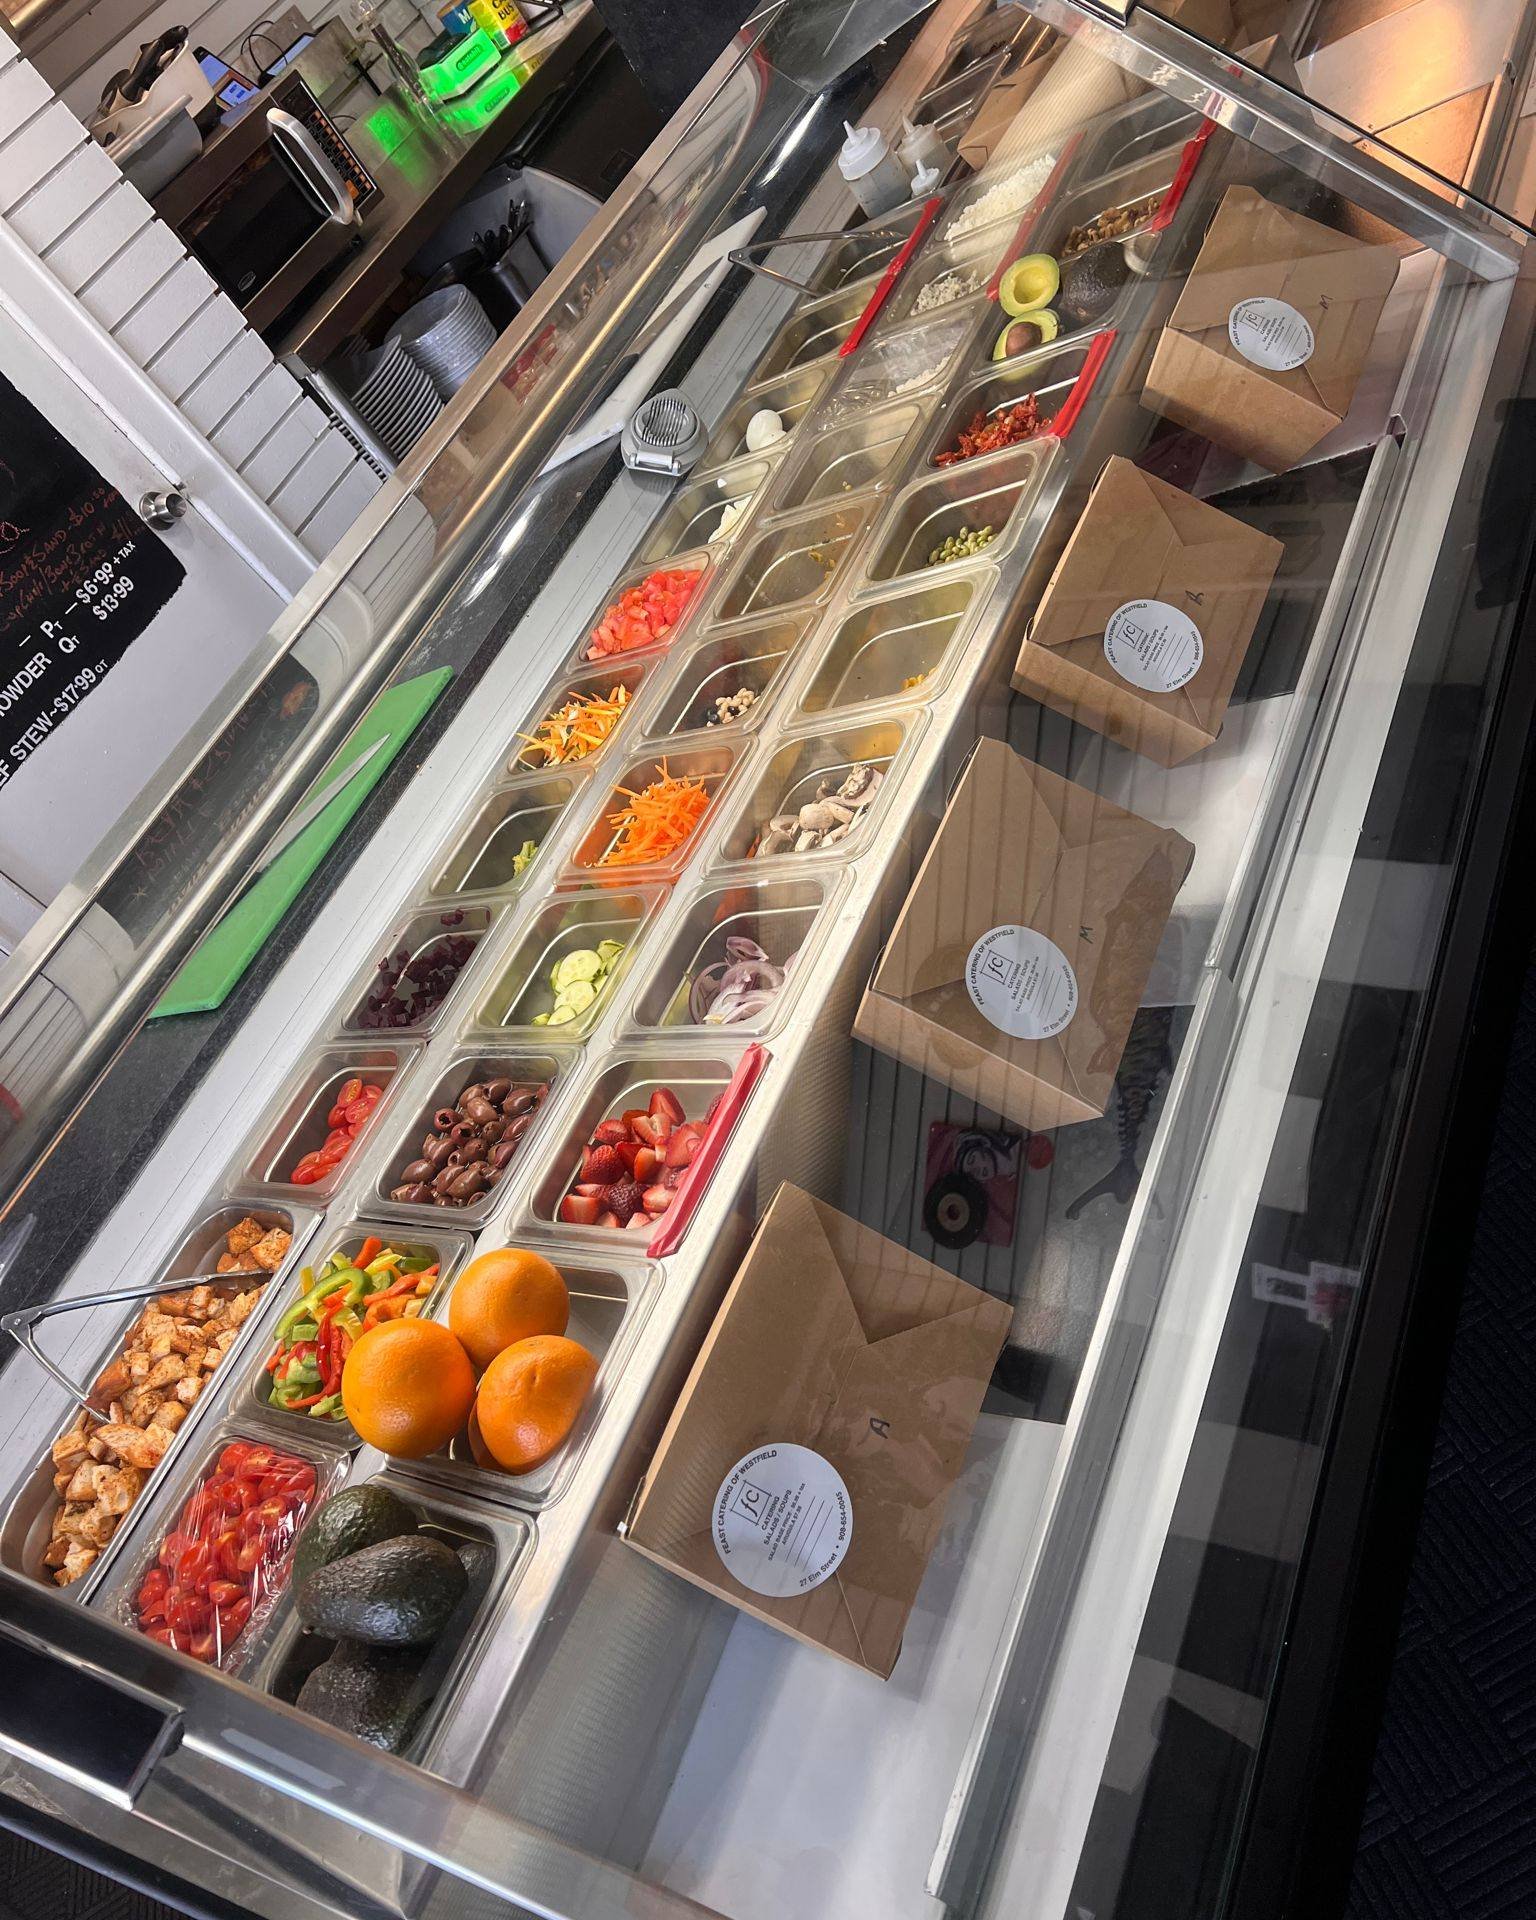 Start your week off with a freshly made #Chopped or #Tossed salad at Feast Catering Westfield.  So many toppings to choose from to help you make YOUR perfect salad.  We also have our daily fresh cabinet and salad special if you need help deciding. 
A